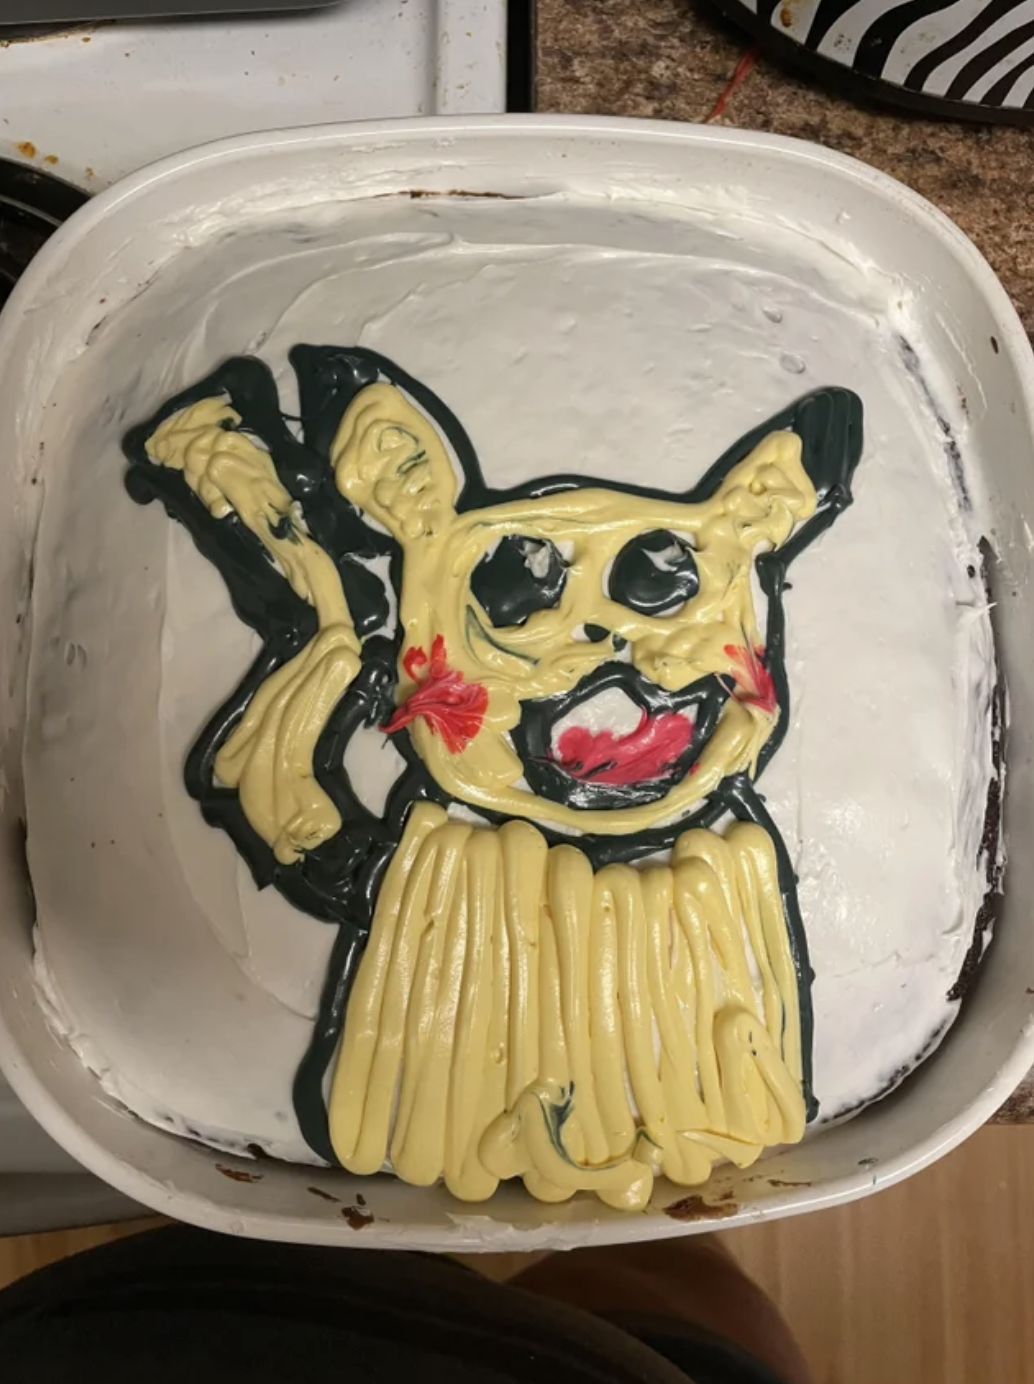 A ghostly, ghastly looking Pikachu made with mustard-yellow strips